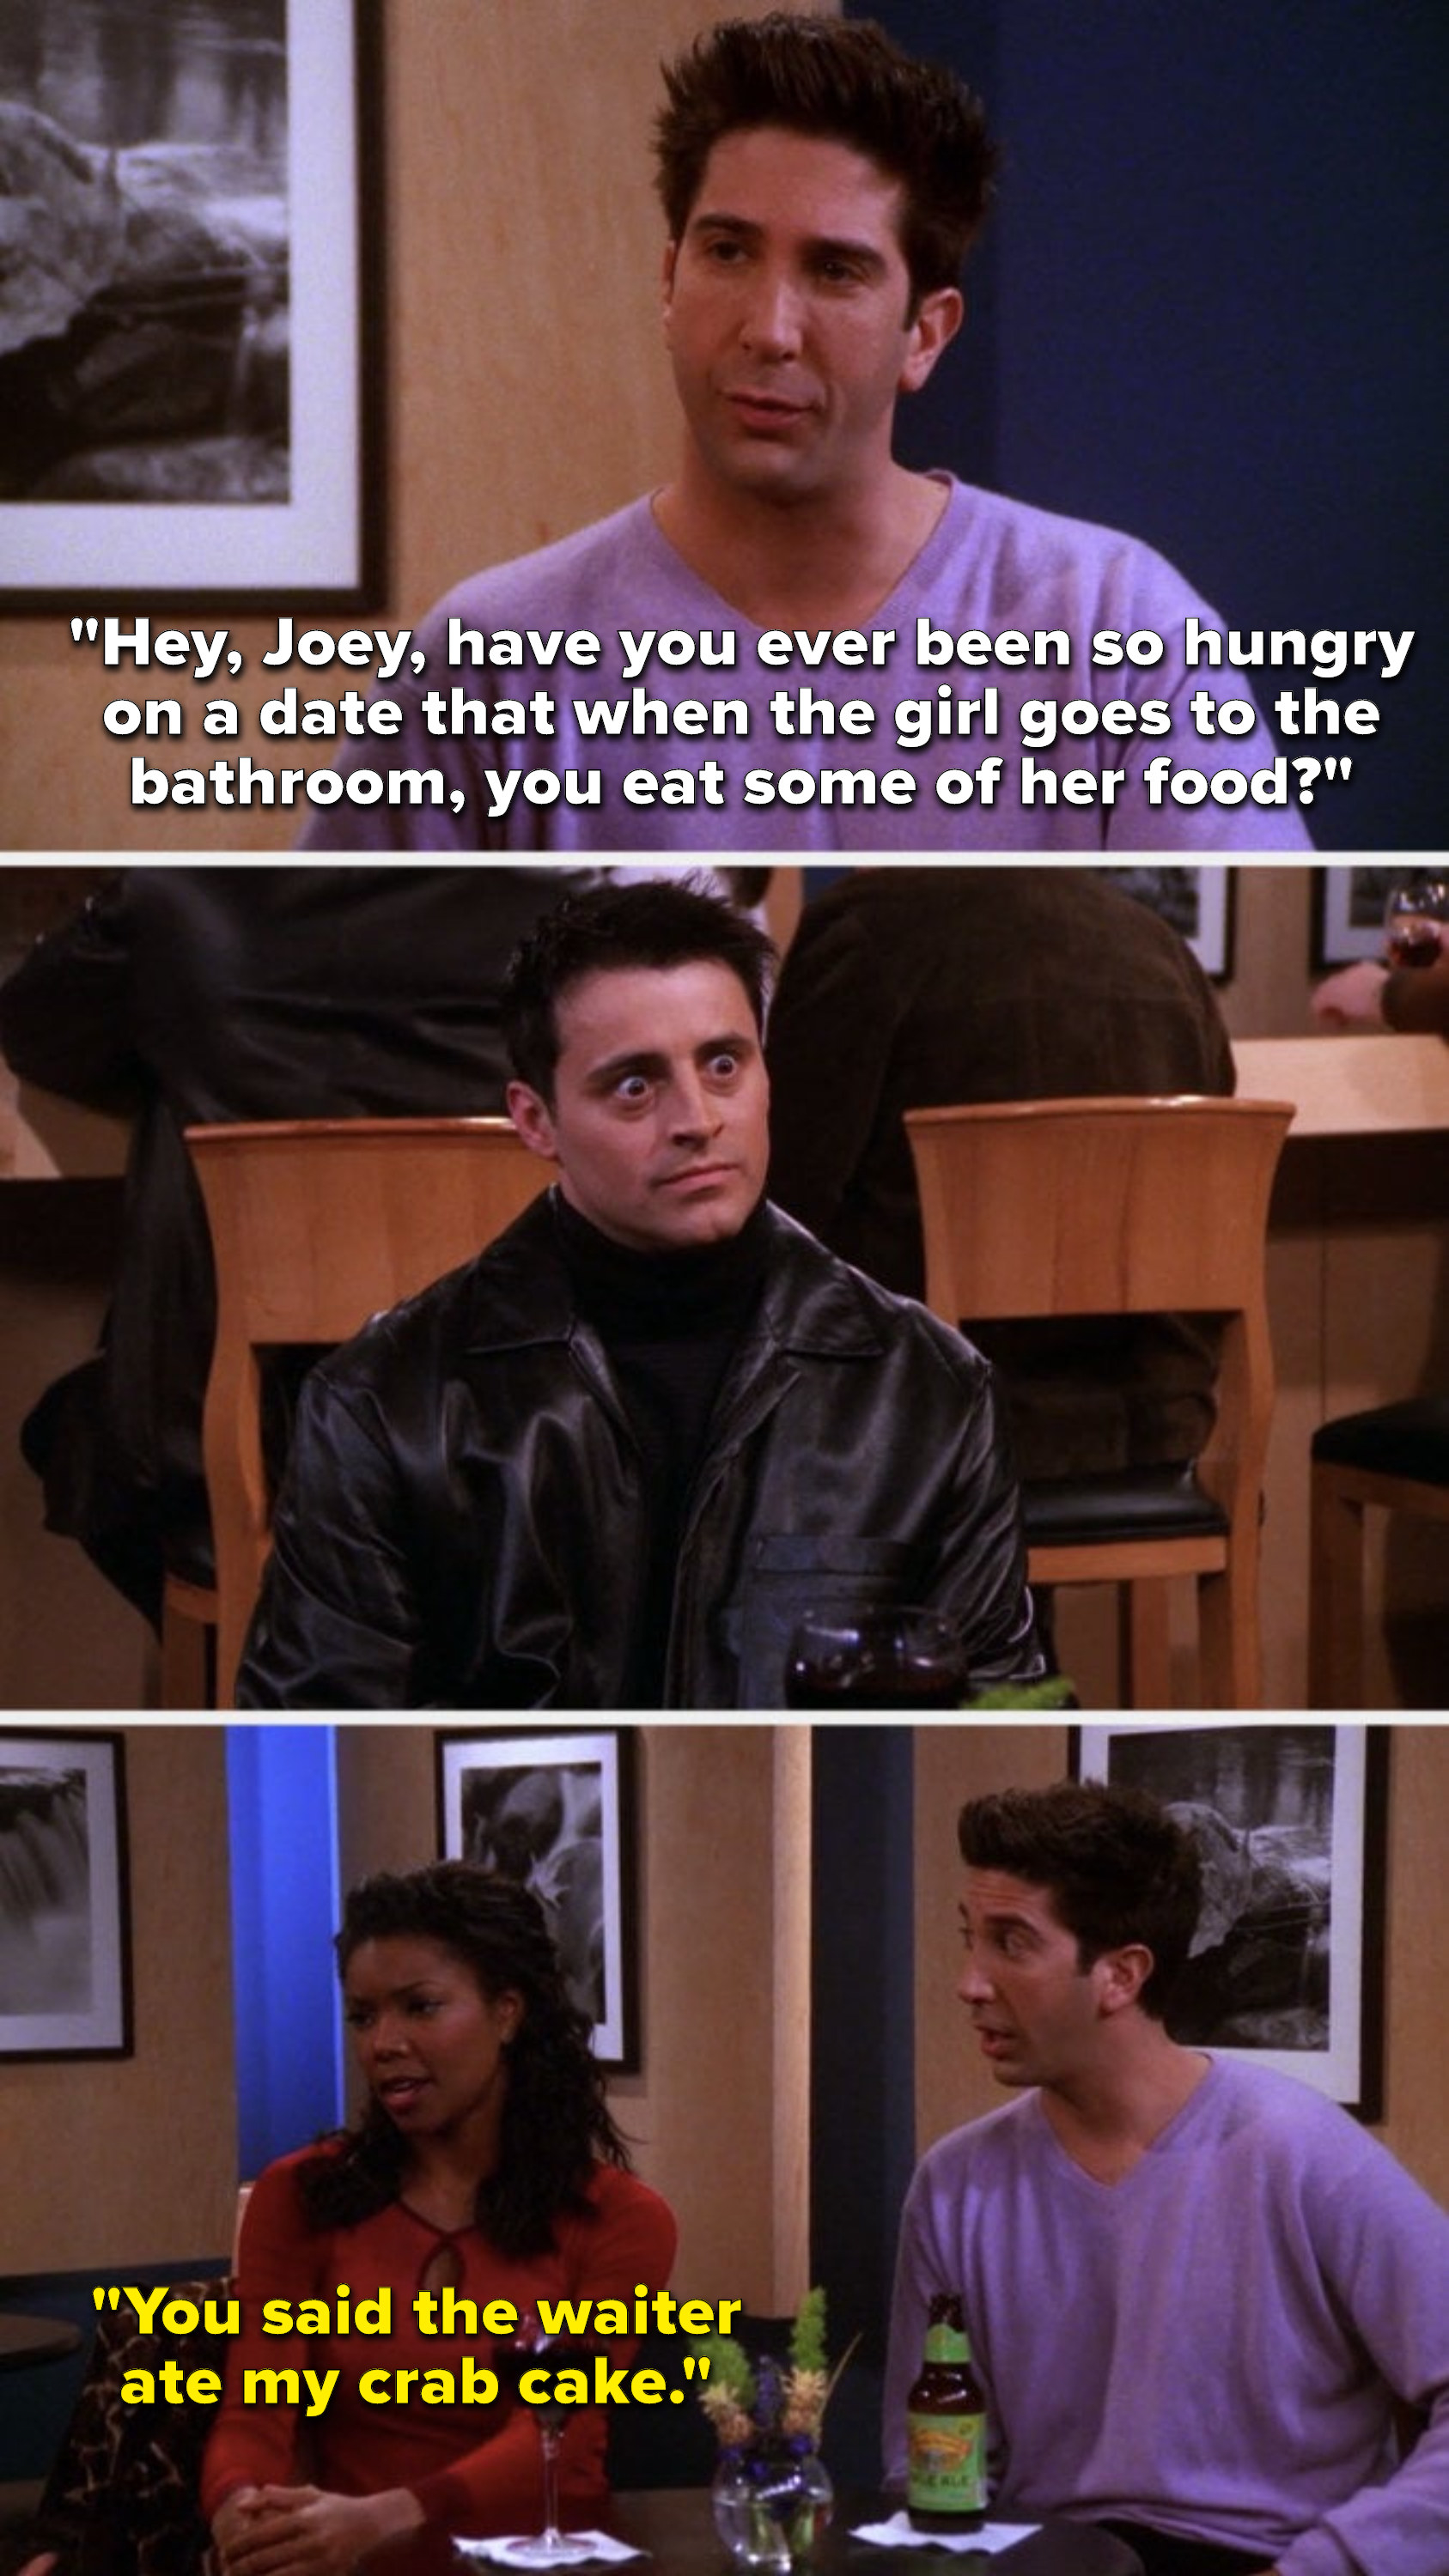 Ross says, &quot;Hey, Joey, have you ever been so hungry on a date that when the girl goes to the bathroom, you eat some of her food,&quot; Joey&#x27;s eyes go wide, and  &quot;You said the waiter ate my crab cake.&quot;